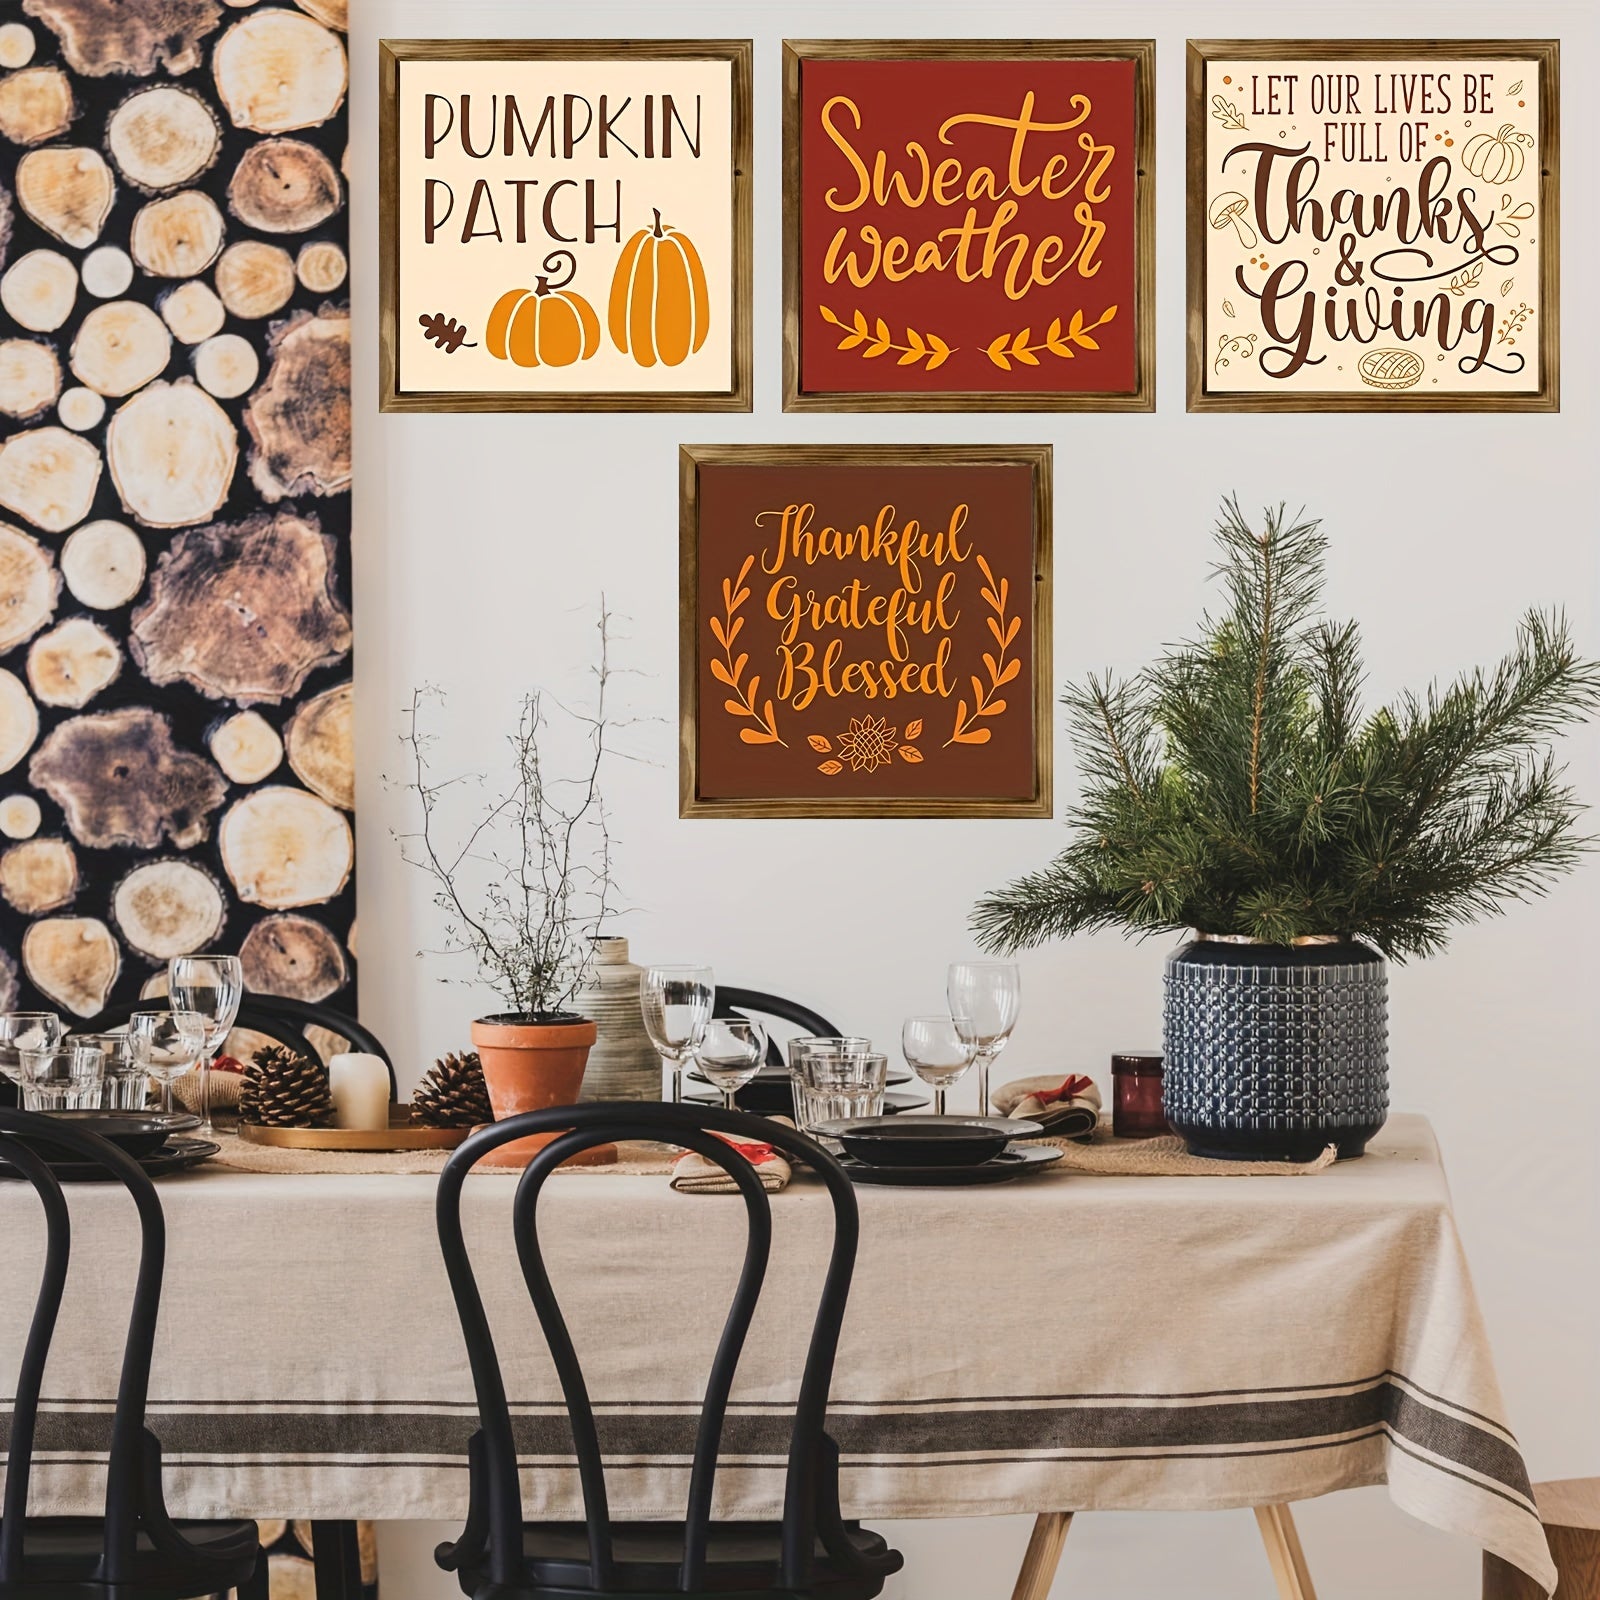 Let Our Lives Be Full Of Thanks & Giving (thanksgiving themed) Christian Wooden Sign (11.81x11.81inch 30CMx30CM) claimedbygoddesigns